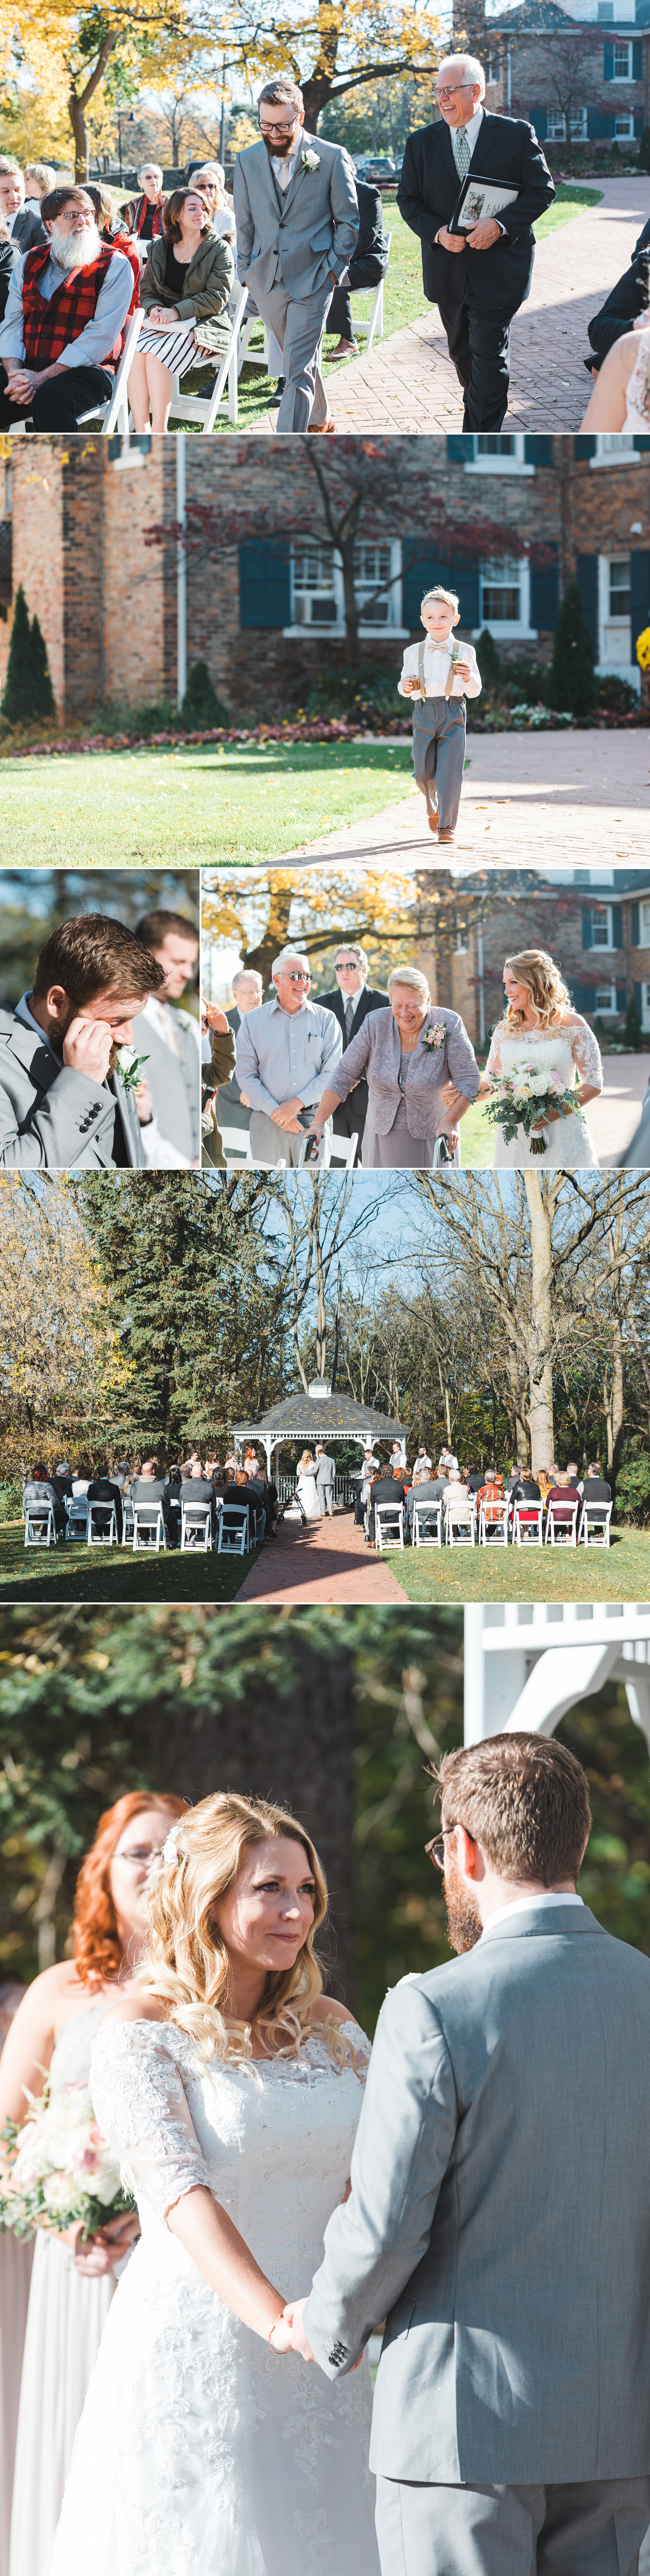 A photo collage of a november wedding ceremony at Longacre House Wedding in Michigan